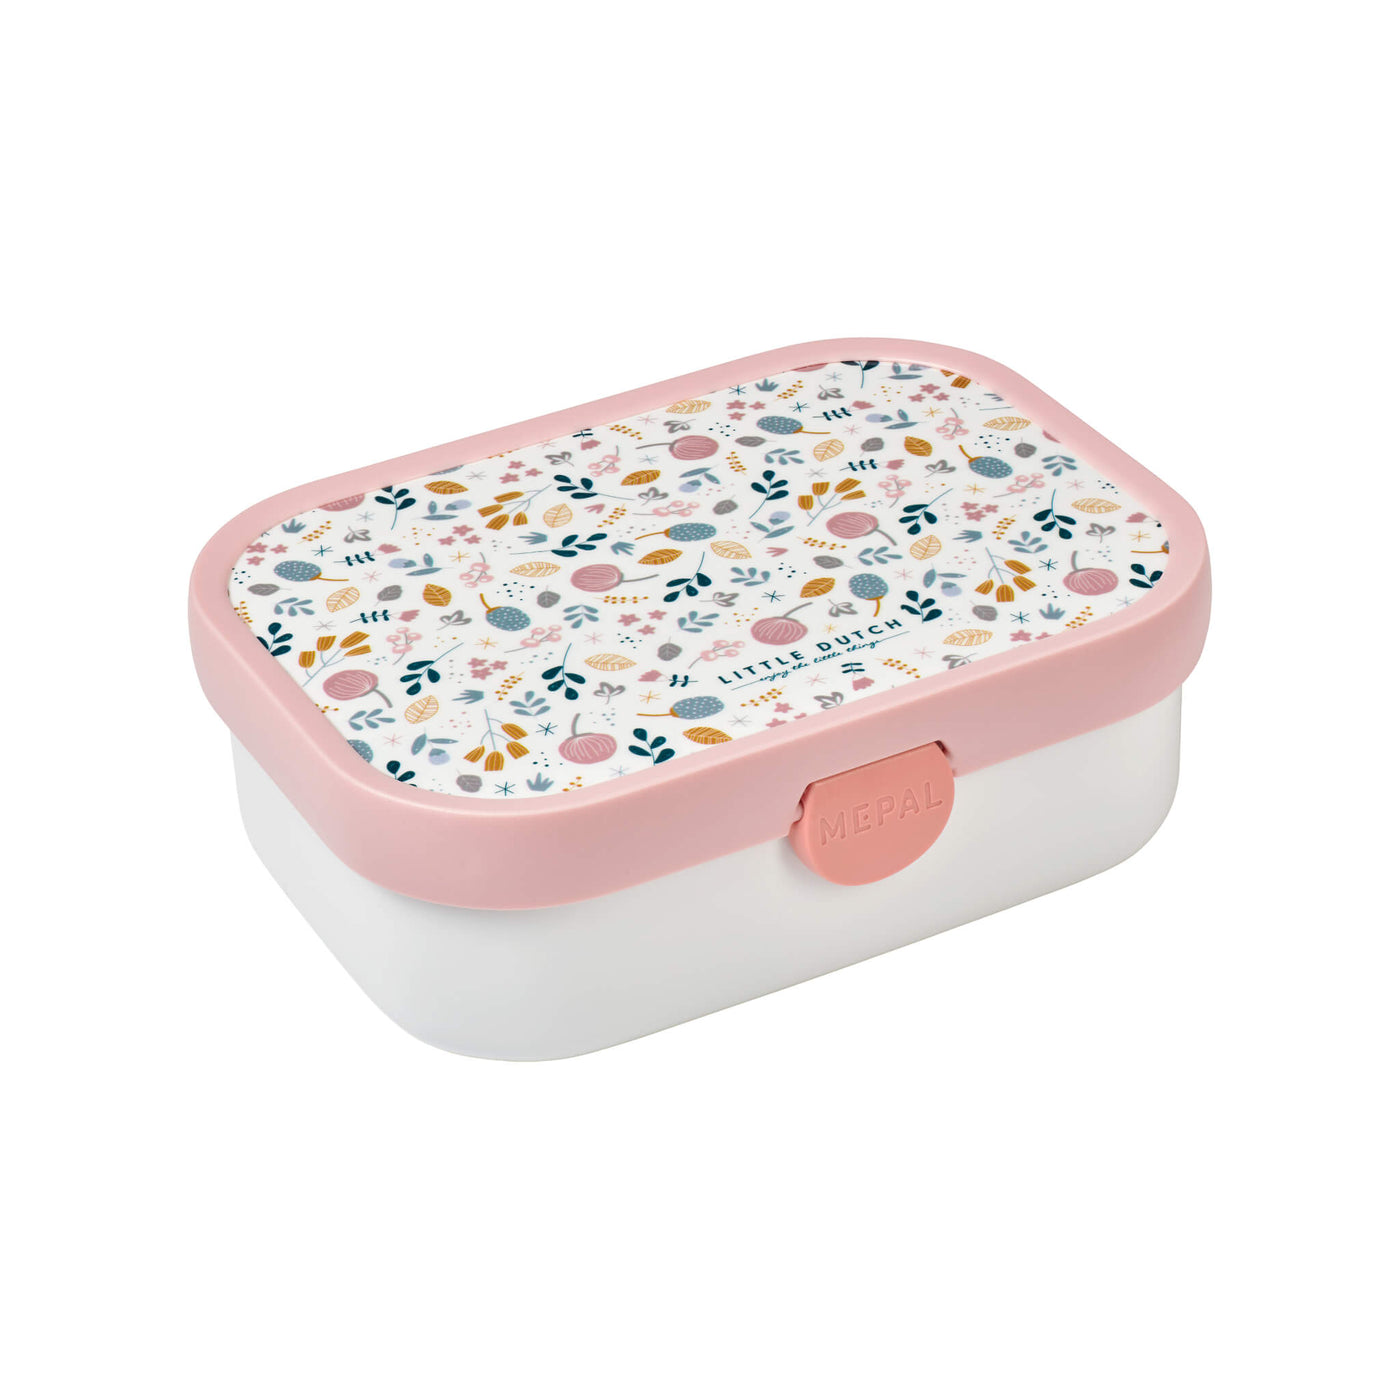 Little Dutch Lunchbox with Fork in Spring Flowers Design 